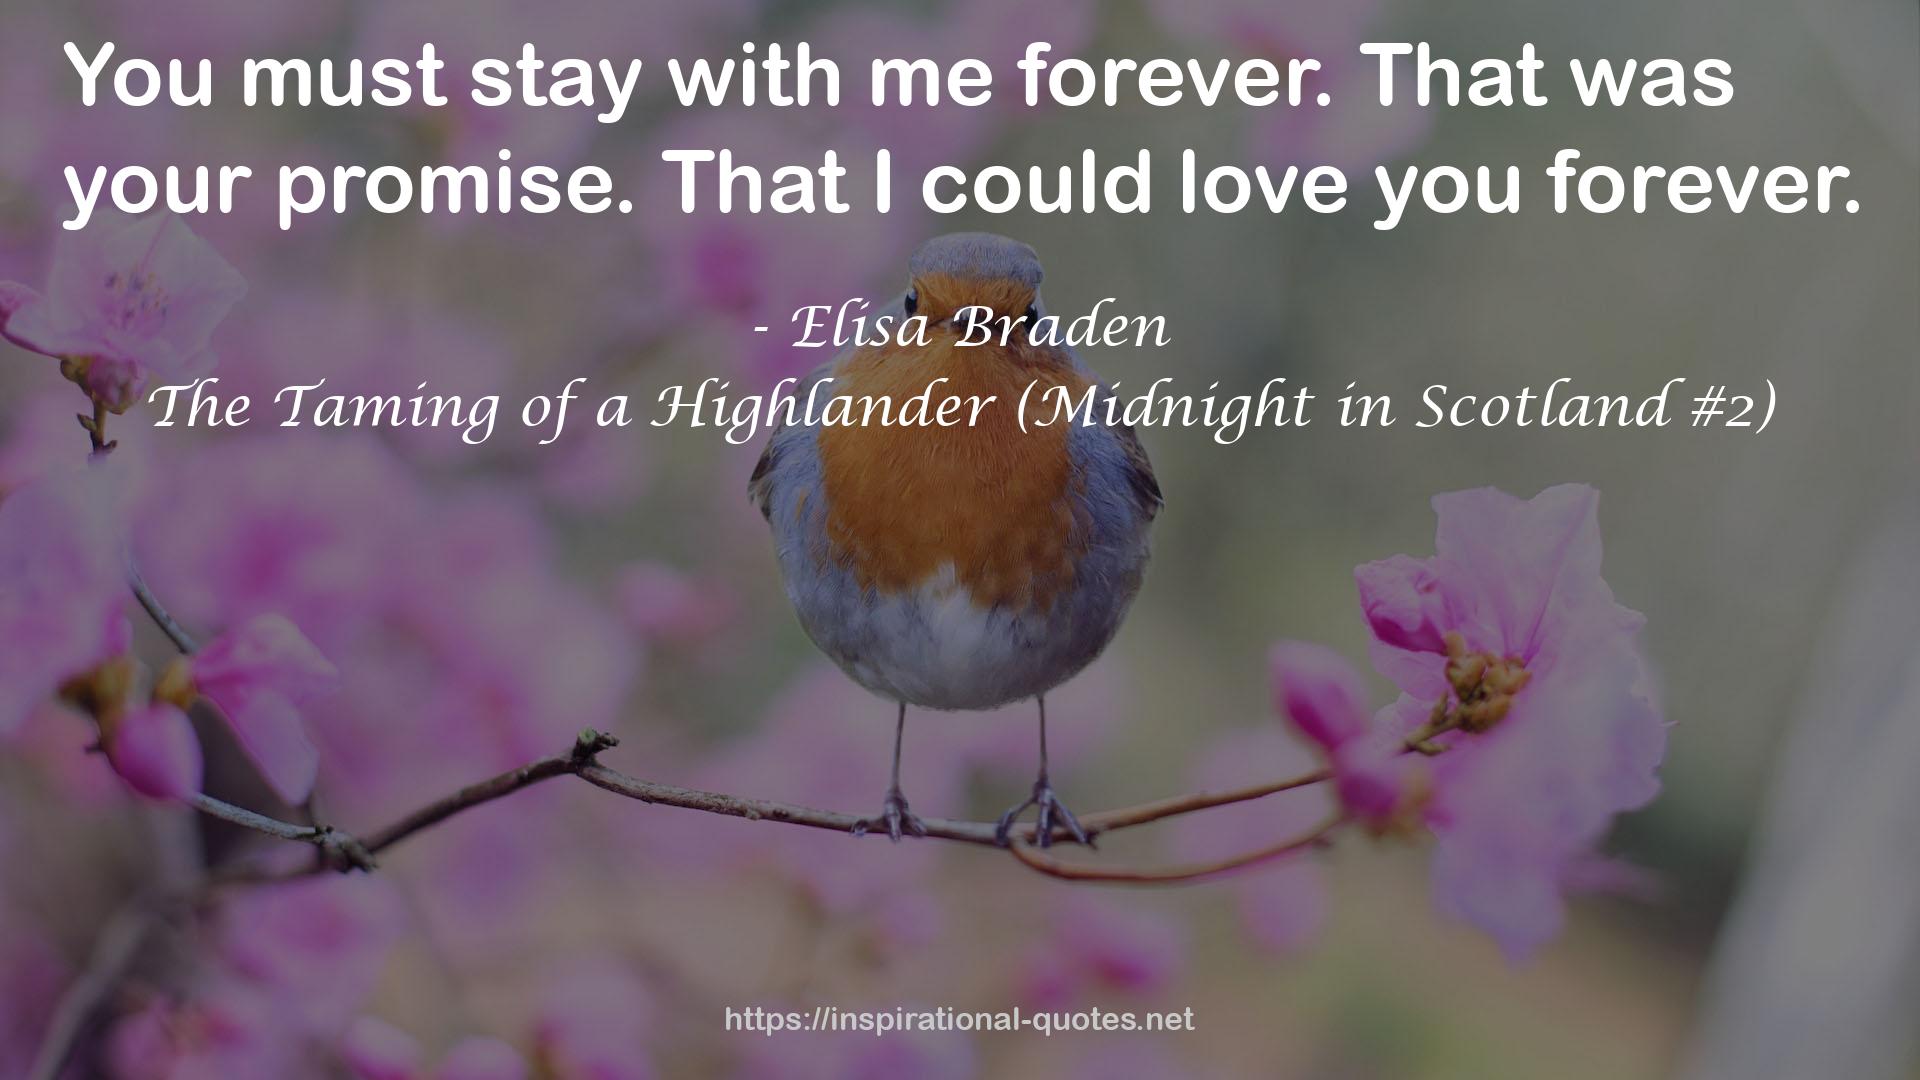 The Taming of a Highlander (Midnight in Scotland #2) QUOTES